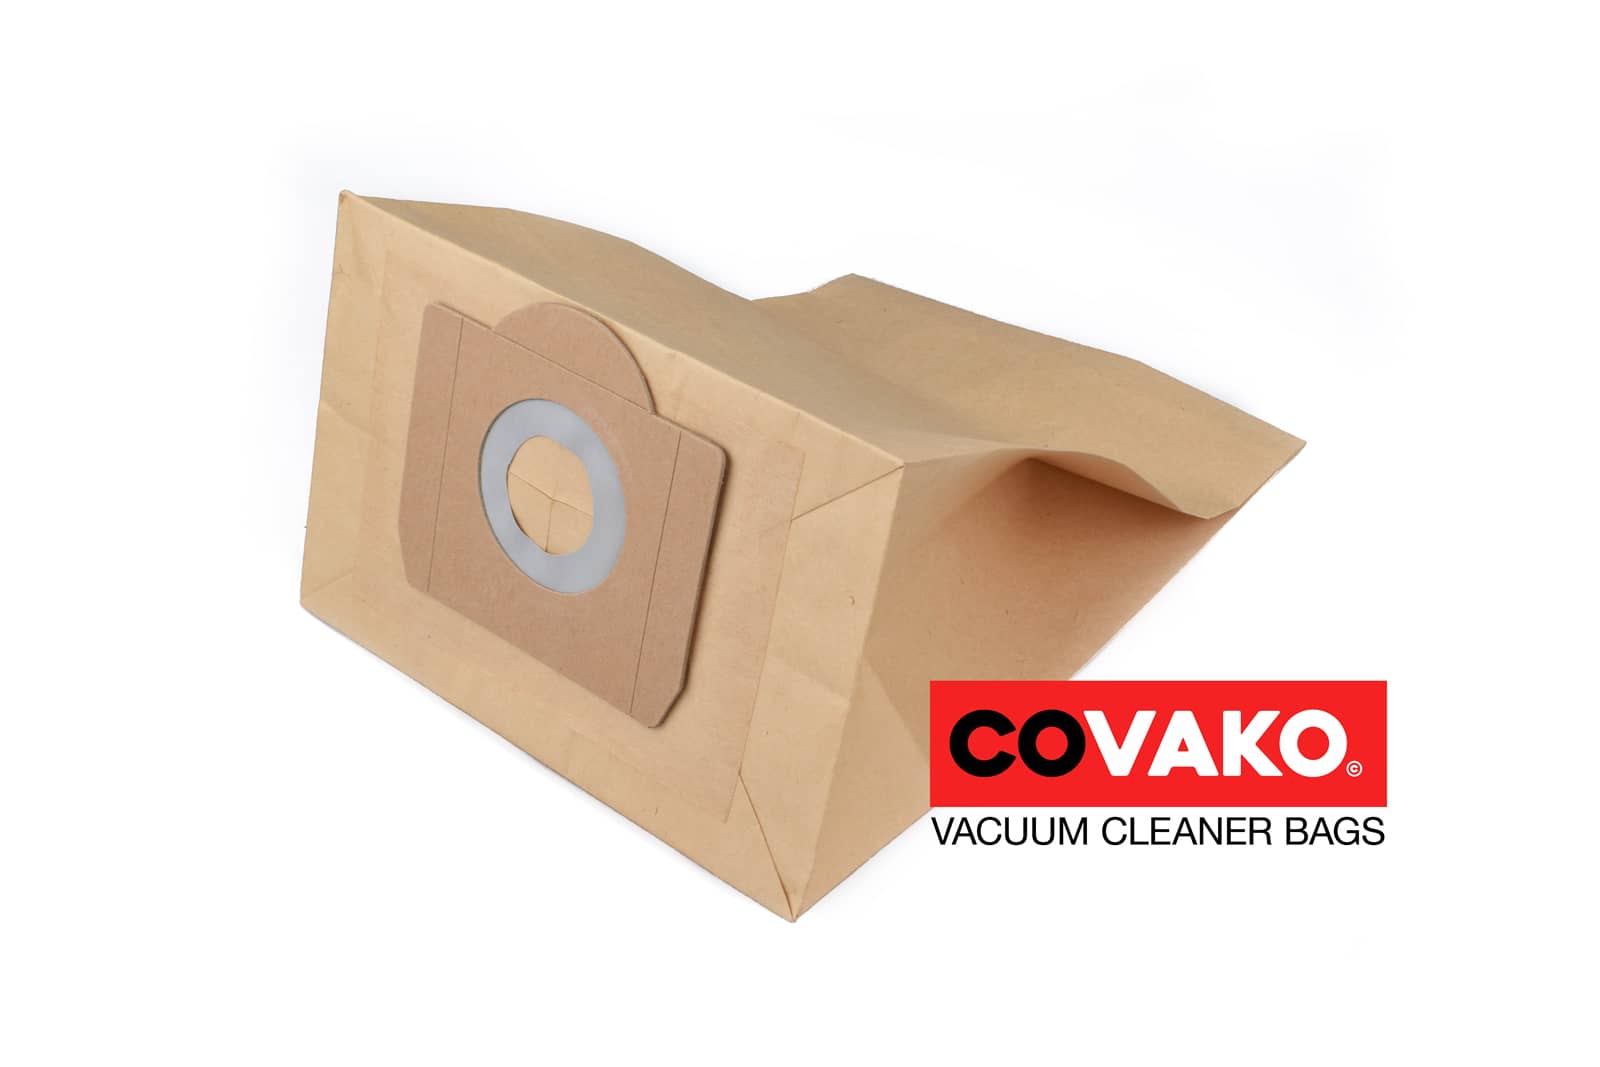 Gansow GP 1/16 Eco A / Paper - Gansow vacuum cleaner bags